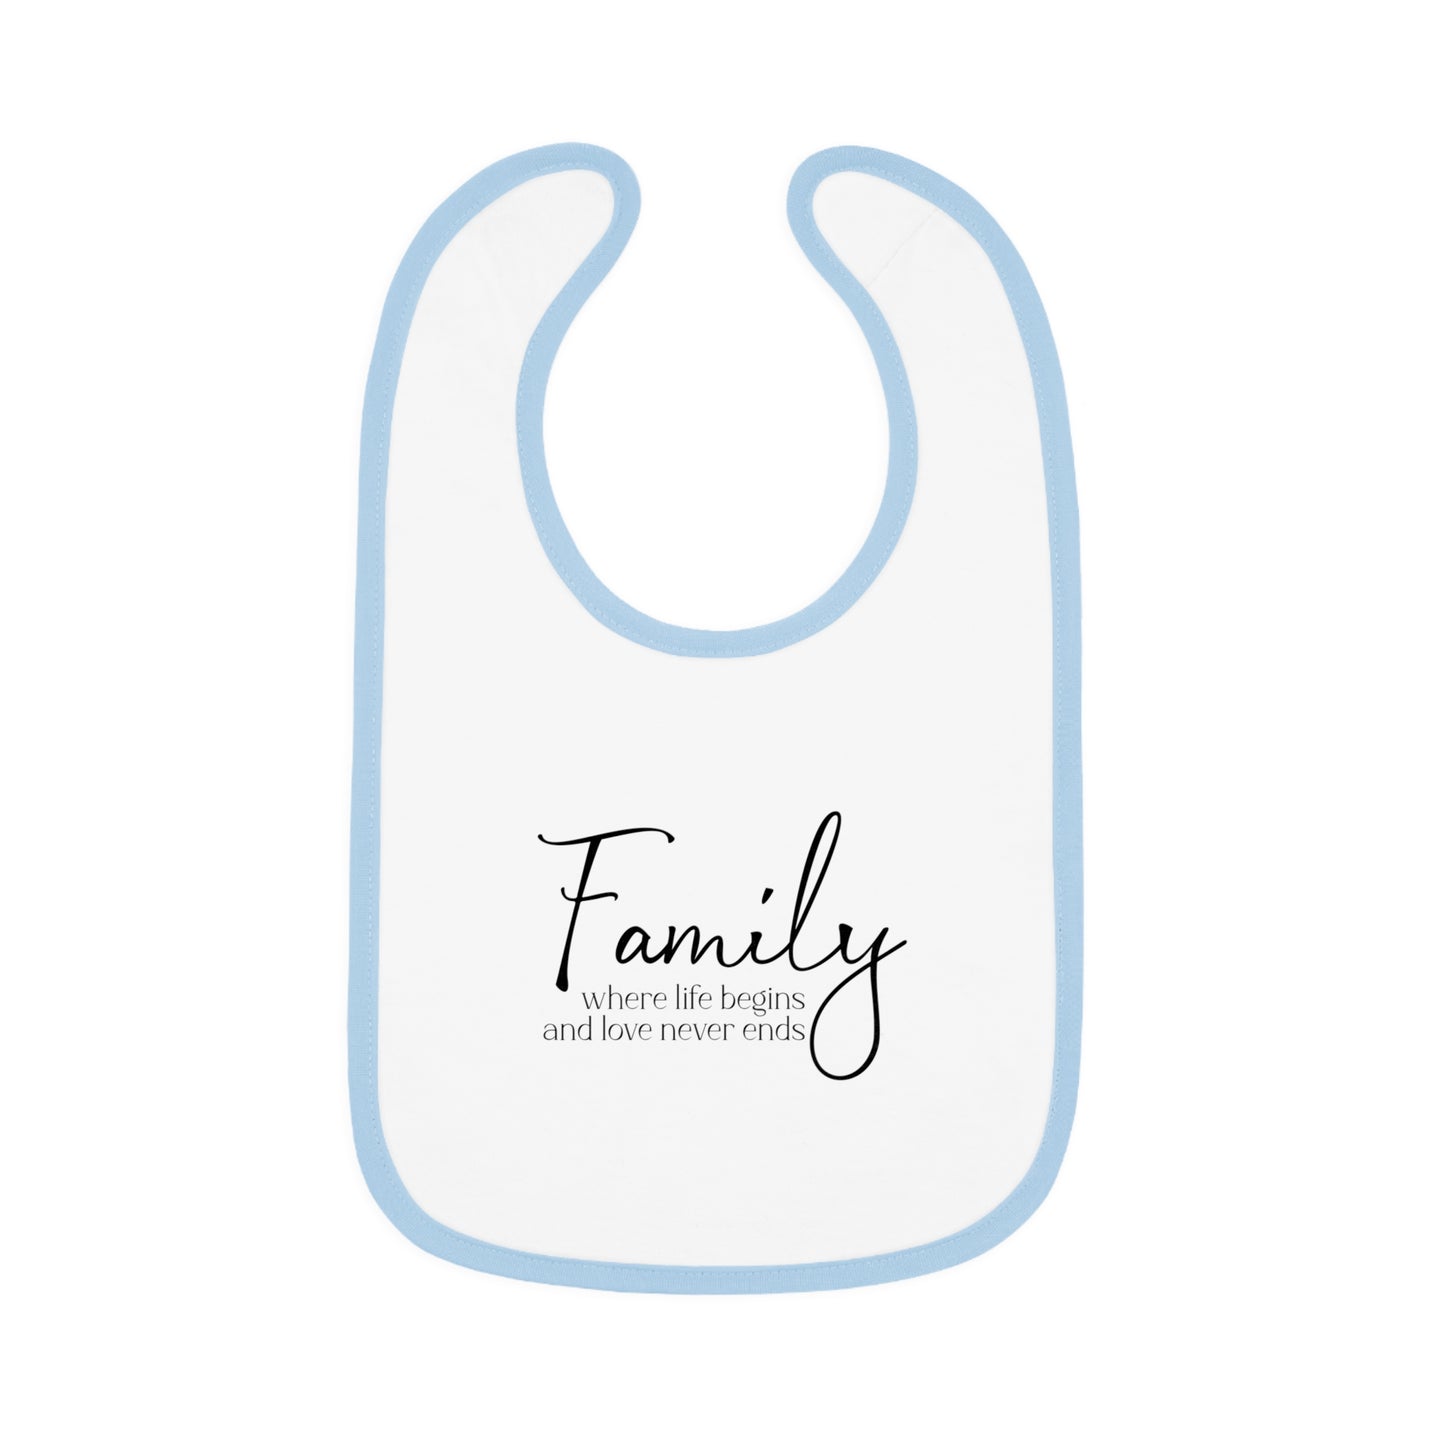 Family... Where Life Begins and Love Never Ends - Baby Contrast Trim Jersey Bib